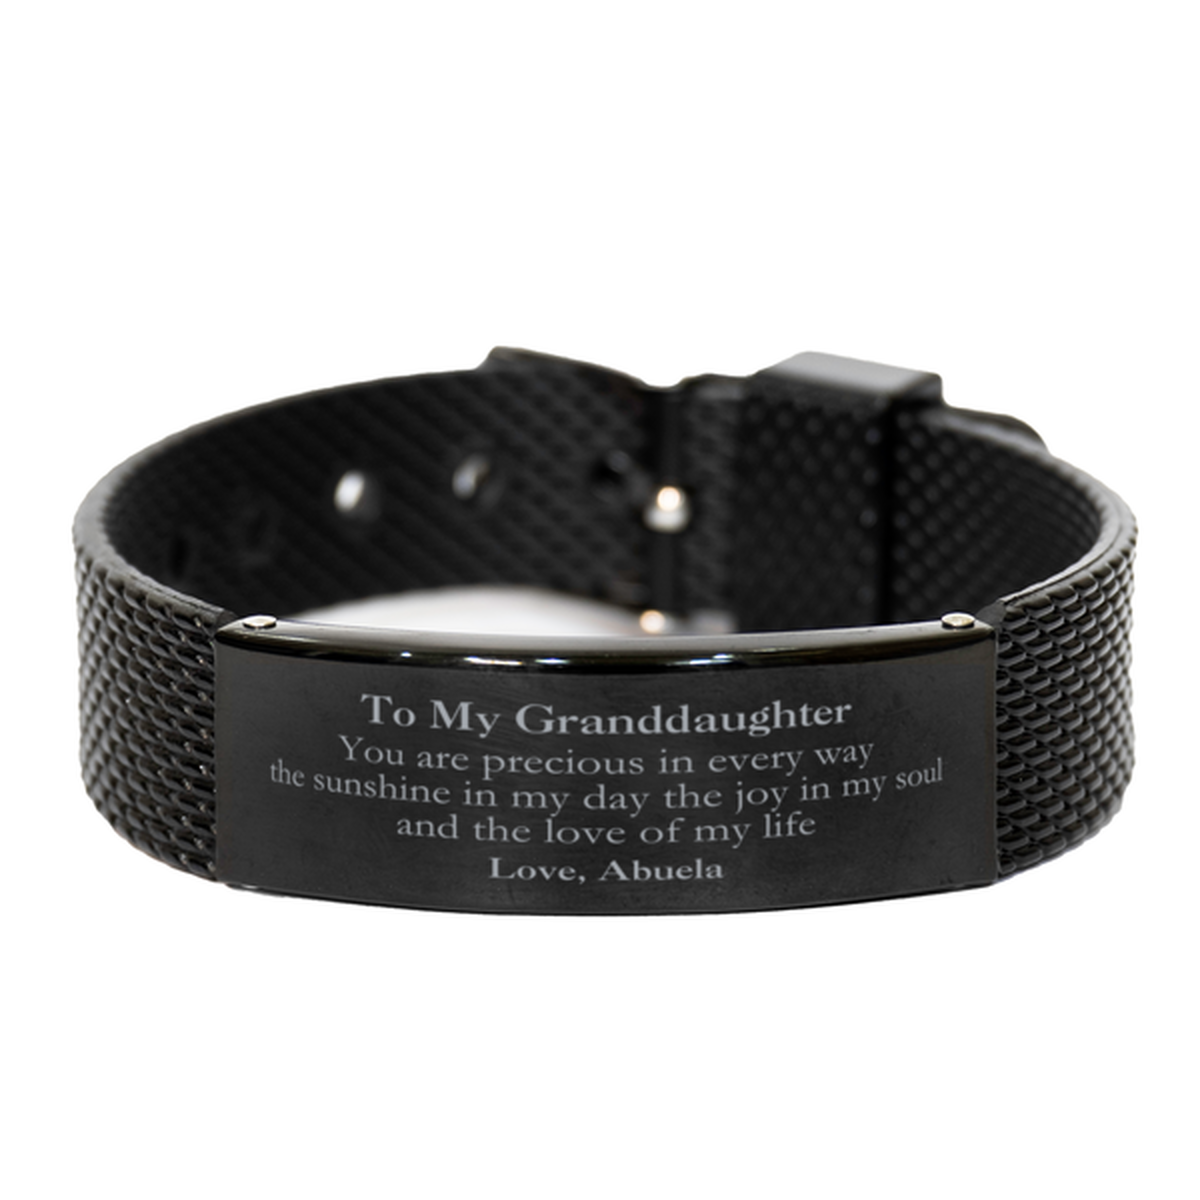 Graduation Gifts for Granddaughter Black Shark Mesh Bracelet Present from Abuela, Christmas Granddaughter Birthday Gifts Granddaughter You are precious in every way the sunshine in my day. Love, Abuela